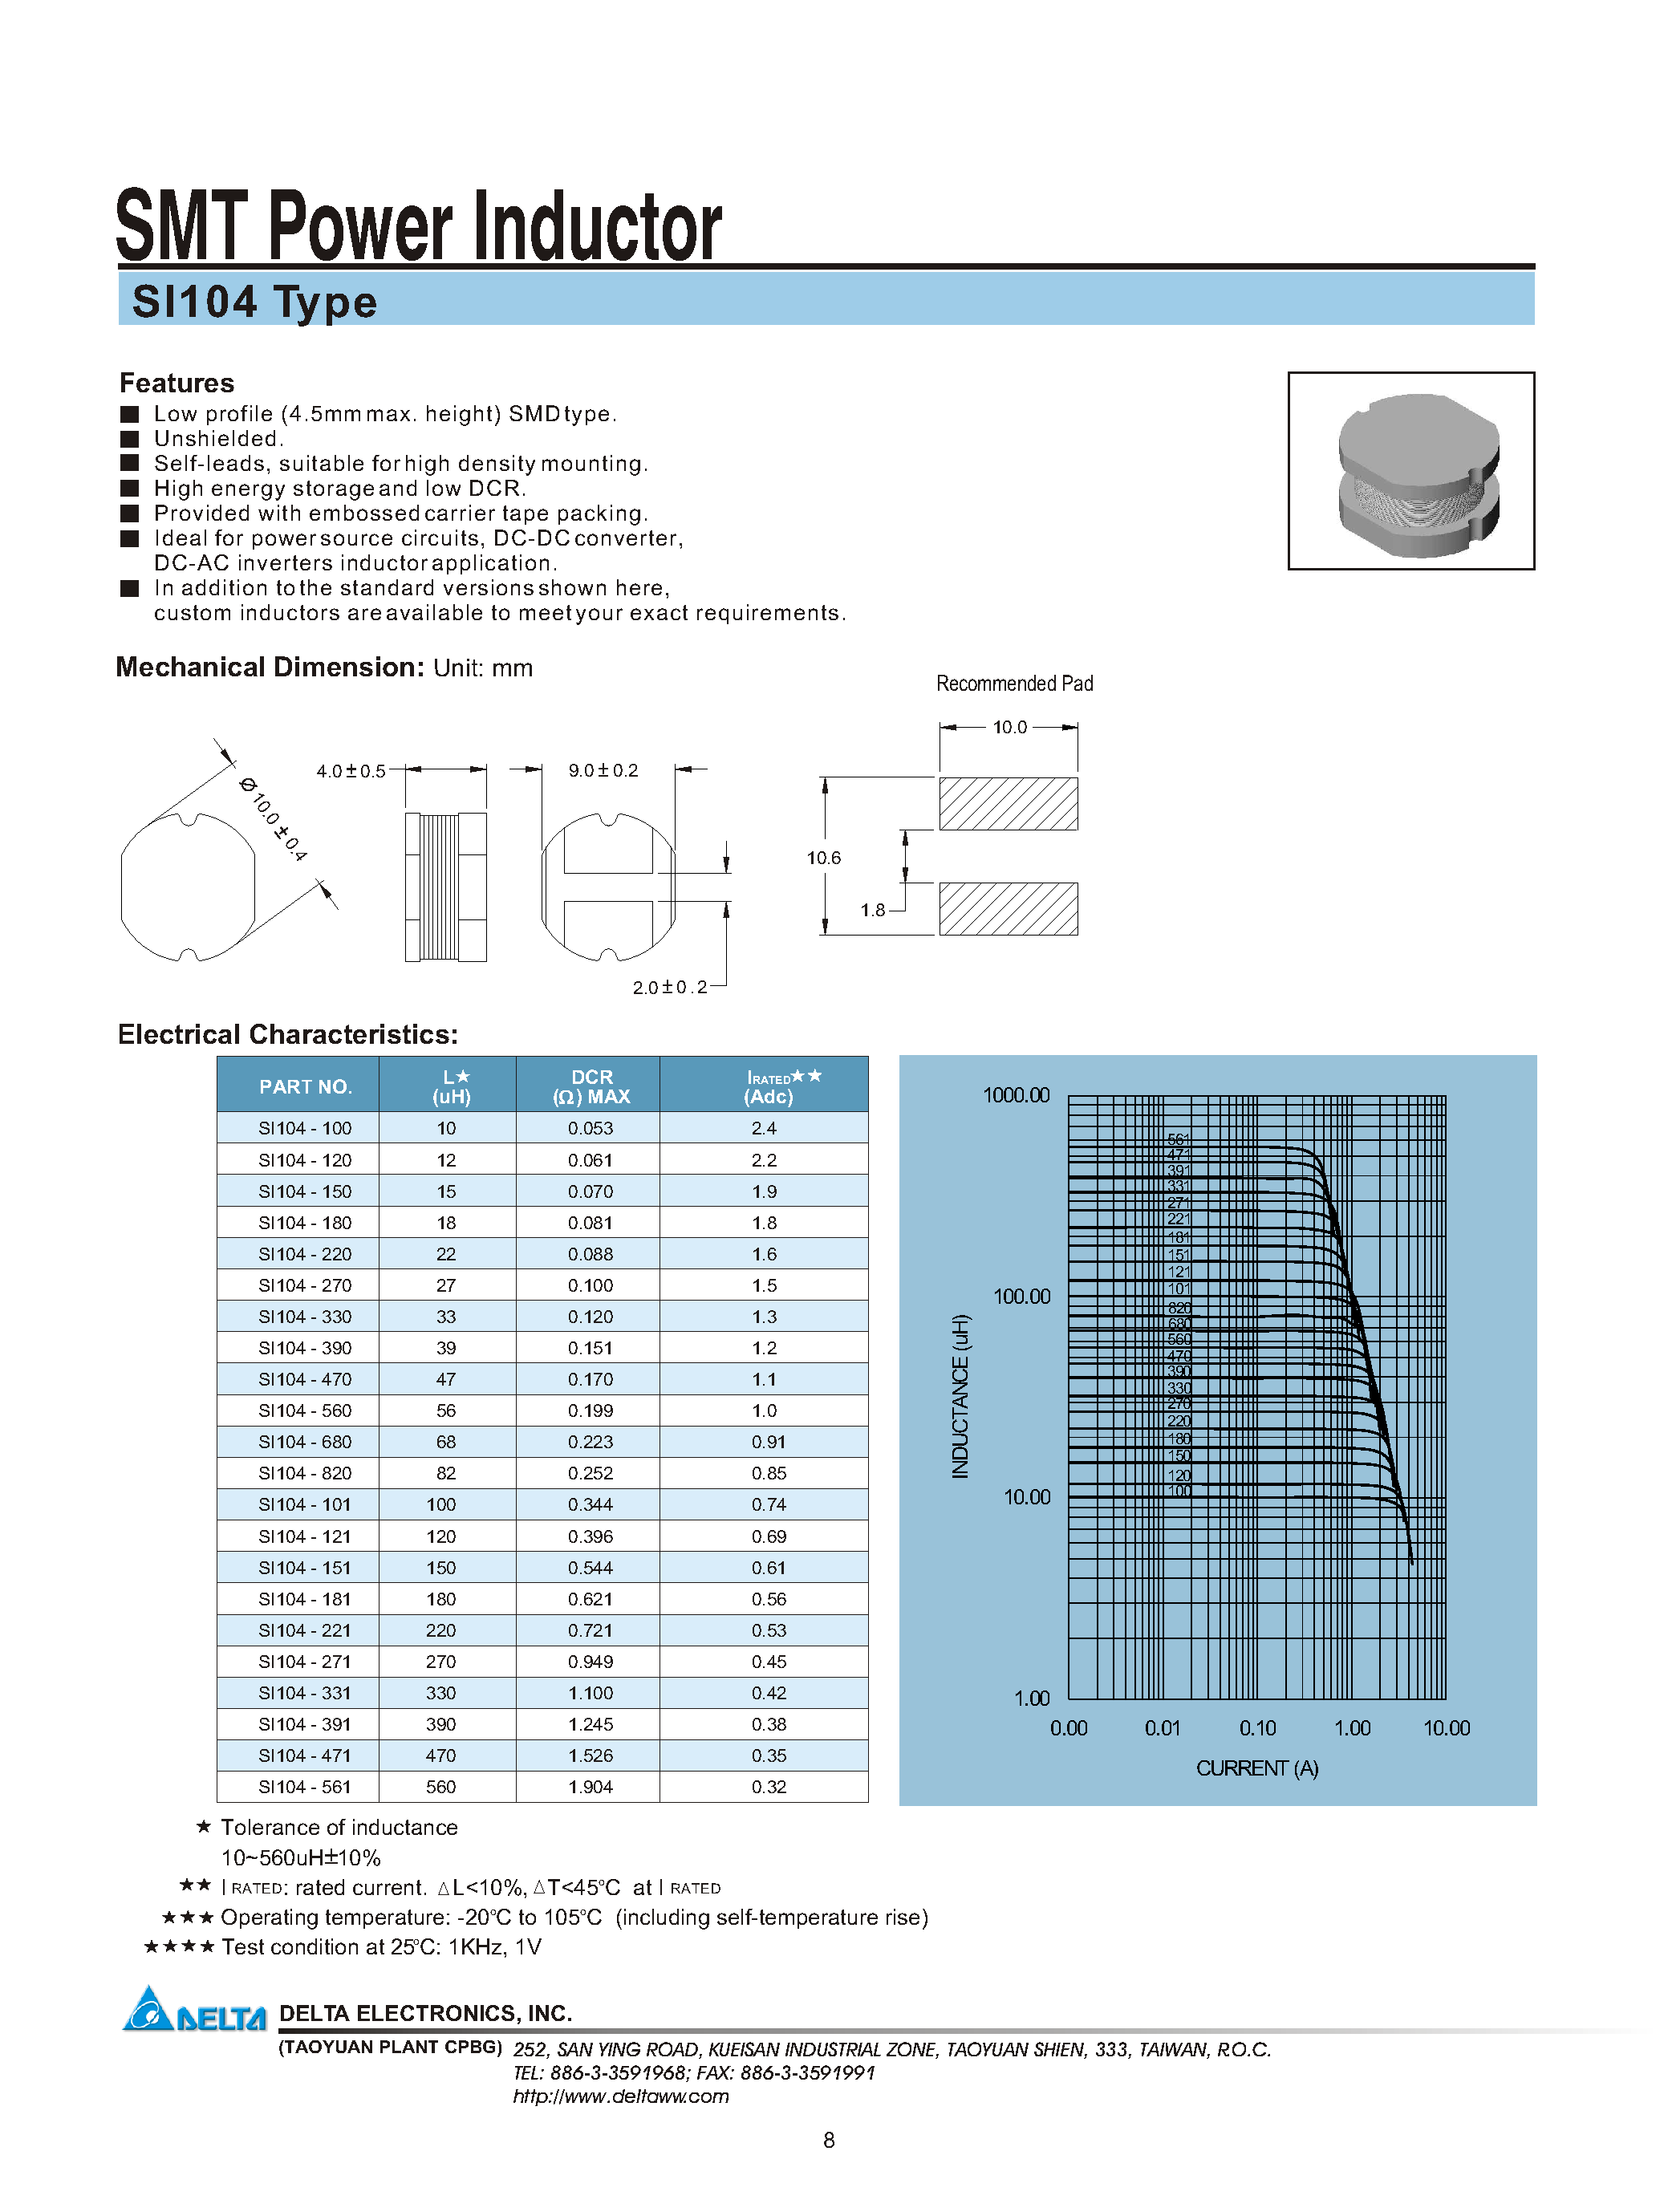 Datasheet SI104-270 - SMT Power Inductor page 1